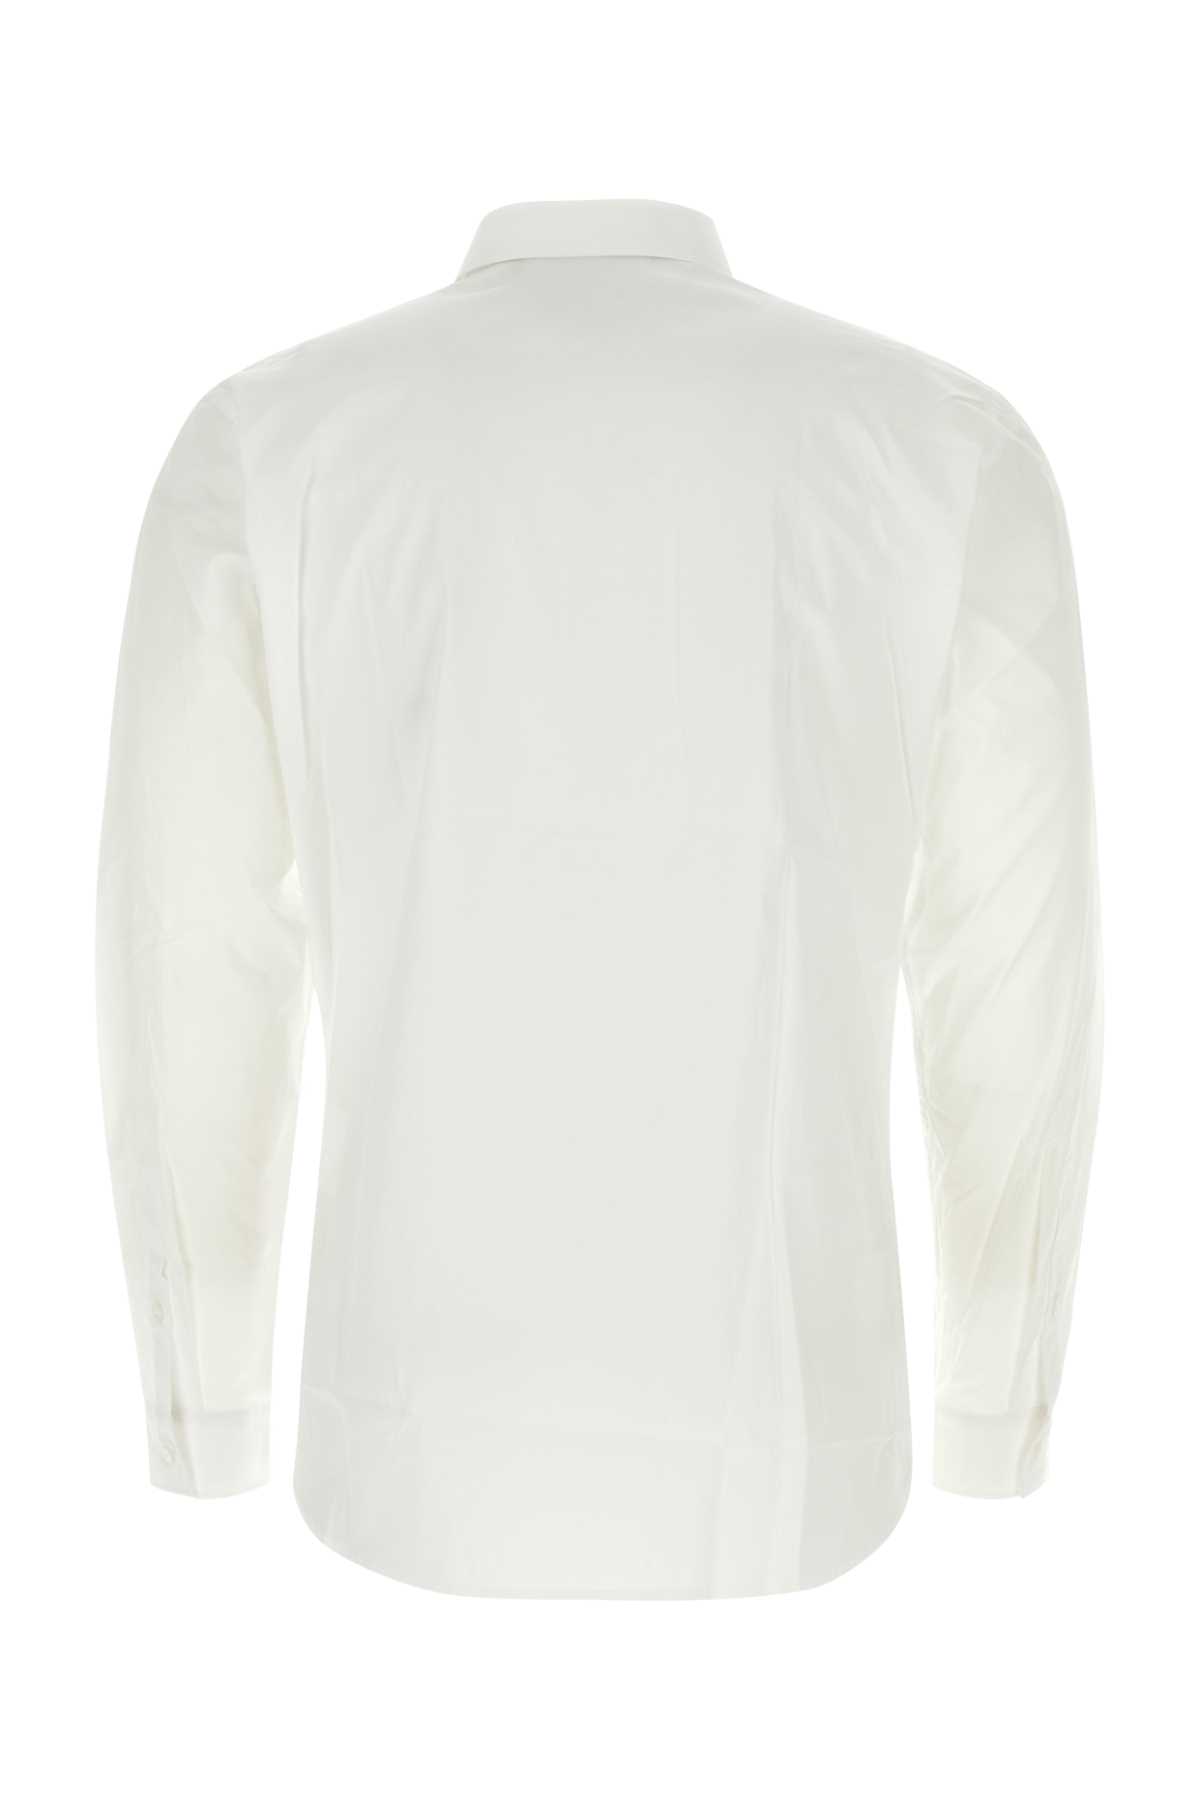 Versace Jeans Couture White Poplin Shirt